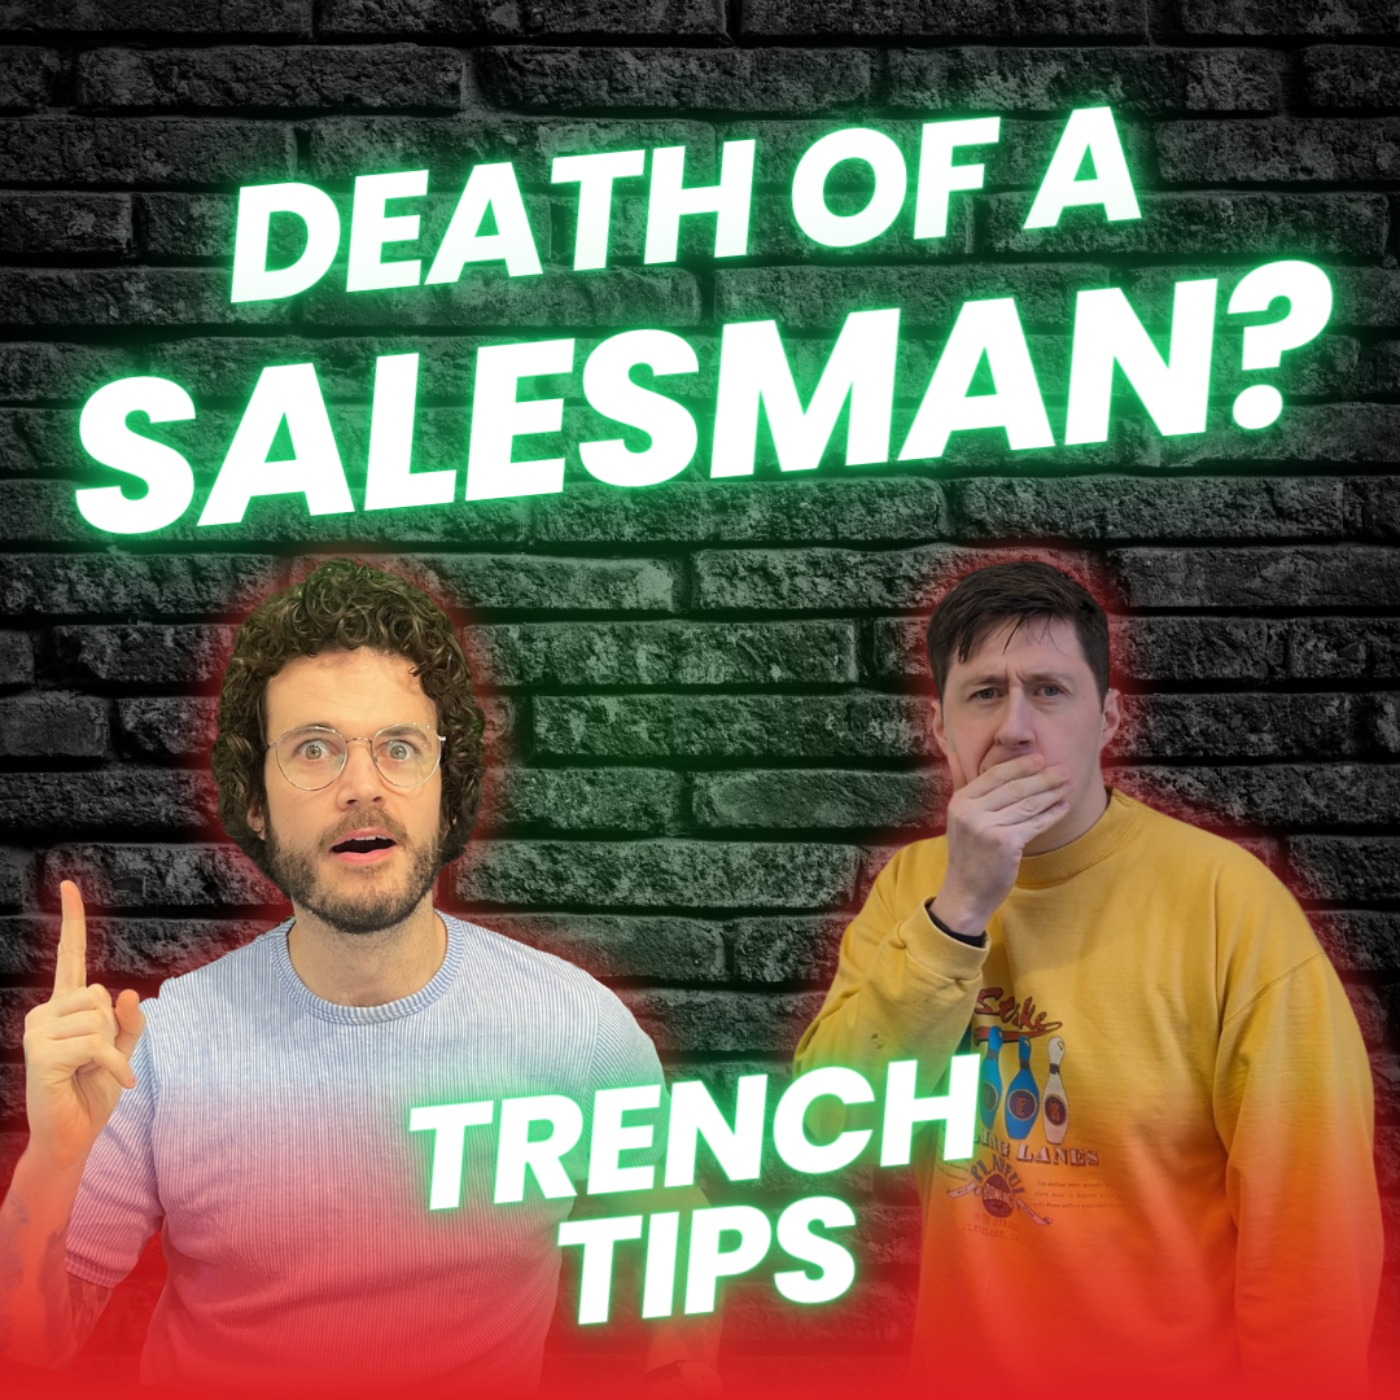 Death of a salesman? - Trench Tips